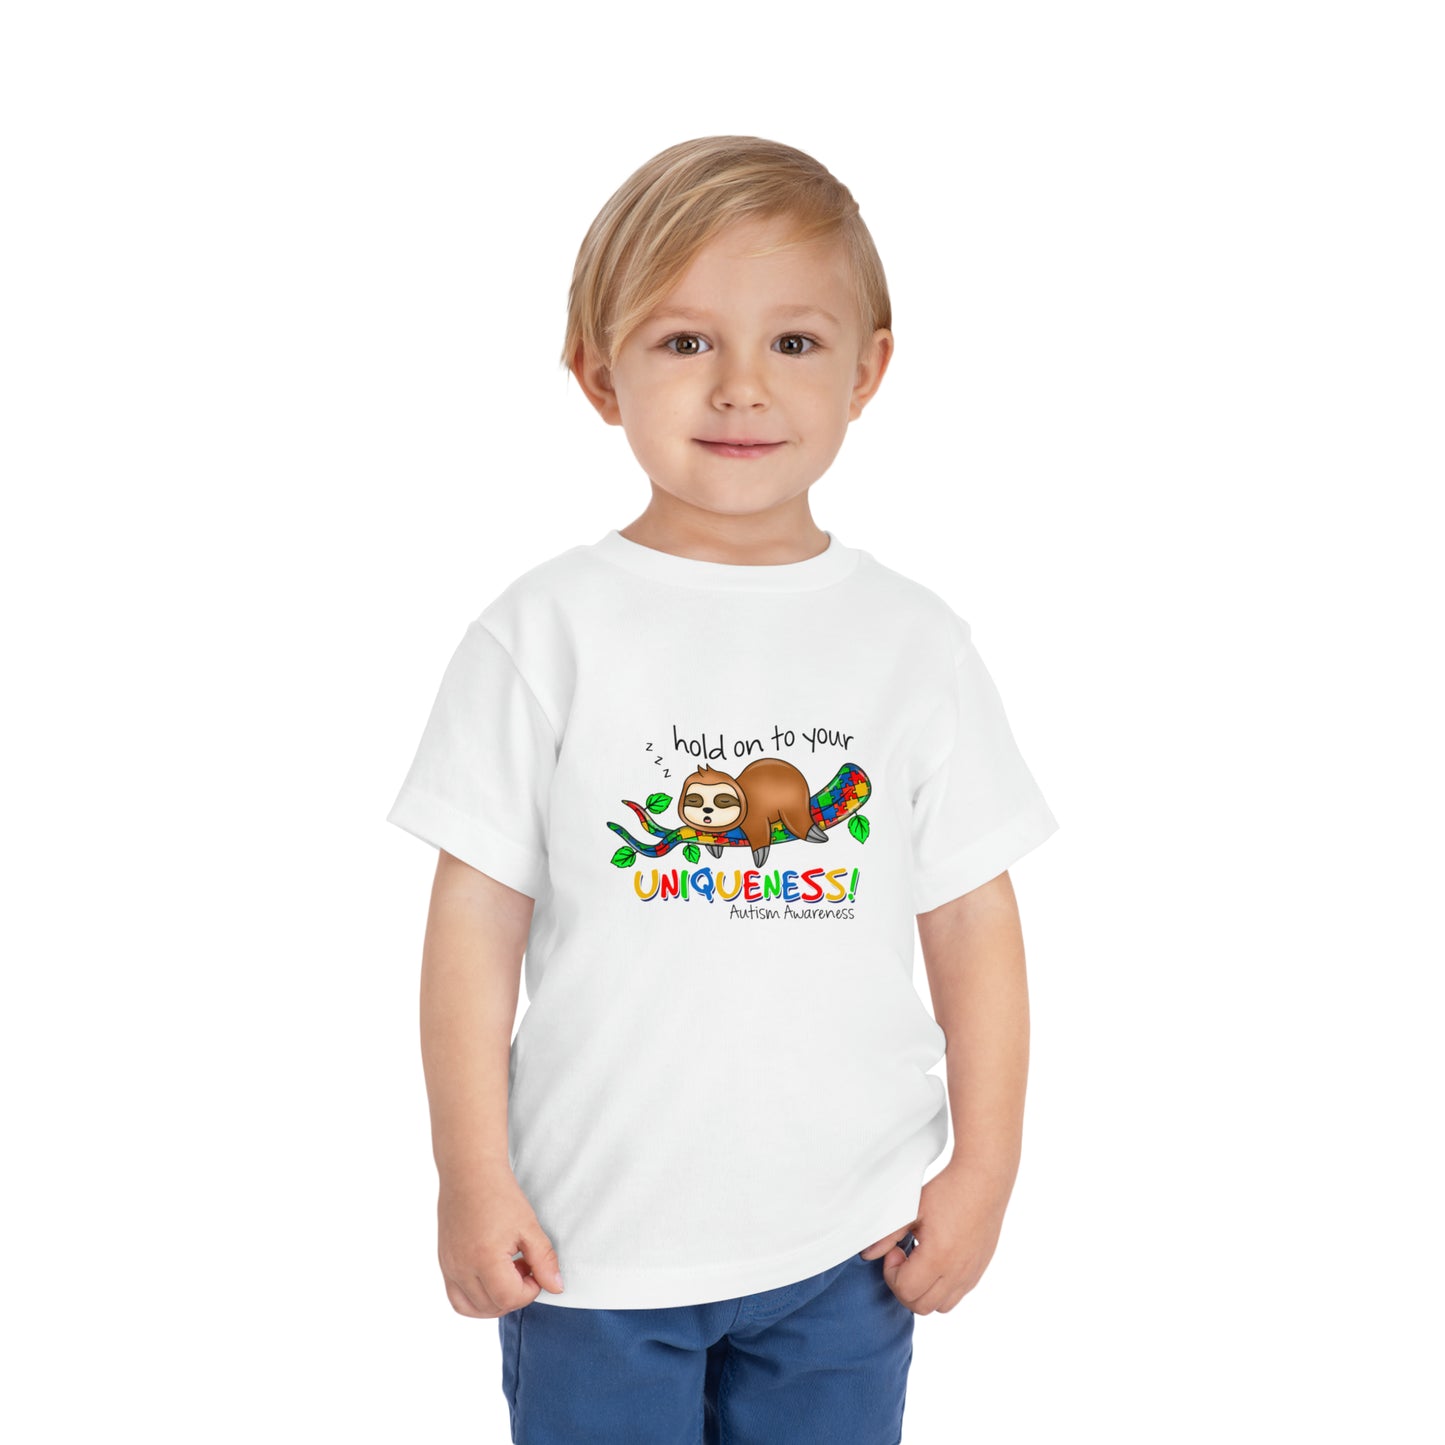 Hold on to your uniqueness Autism Awareness Advocate Toddler Short Sleeve Tee